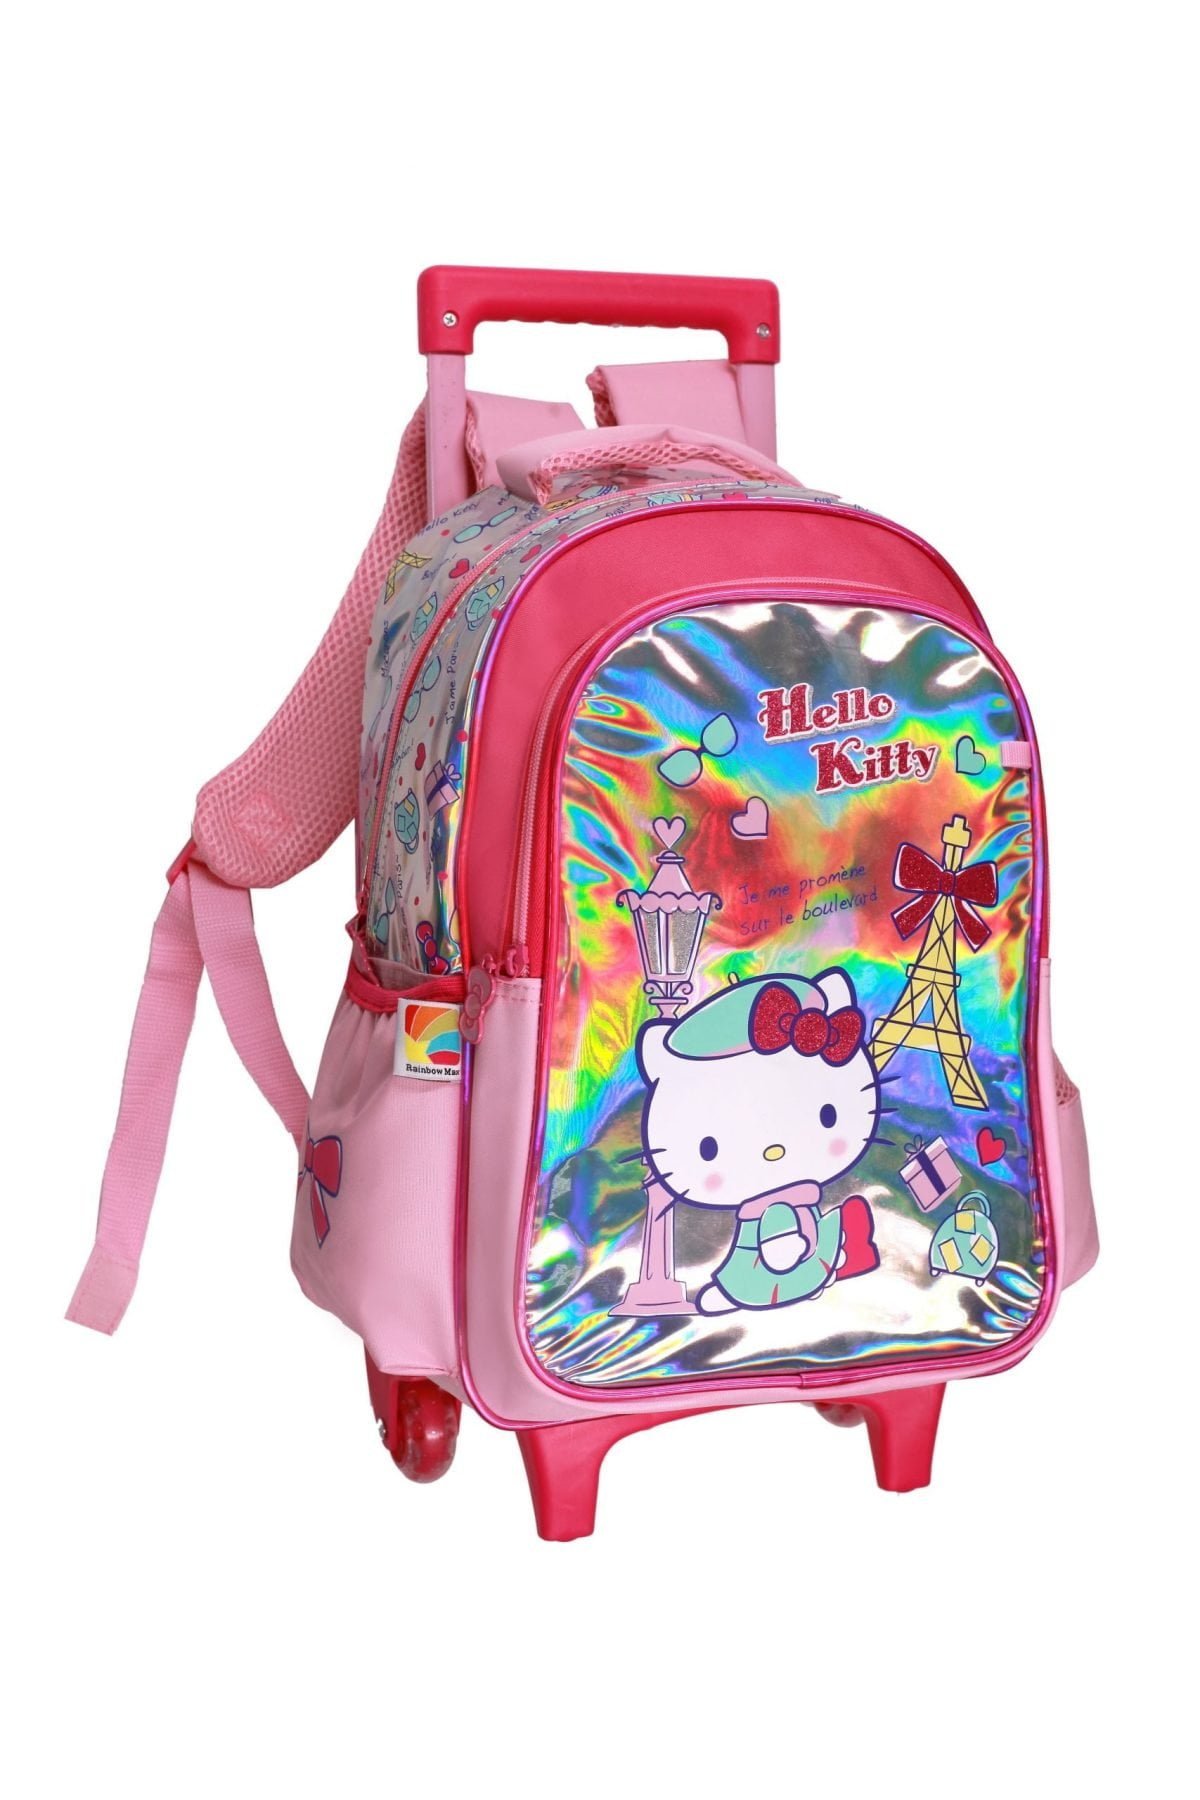 Hk672 3090T 2 Scaled Hello Kitty The Trolley Bag Is A Reliable Companion For Your Journey. The Trolley Features Main Zip Compartment To Keep Your Child'S Belonging Or School Items. The Trolley Has Comfortable Handle On The Top. The Fine Quality Material And Printing Makes It Durable And Stylish Option. It Is Easy To Zip And Unzip With Smooth Zippers And Pullers. The Wheels On The Bottom Make It Easy To Drag. Wipe With A Clean And Dry Cloth. Hello Kitty Trolley Bag Hello Kitty Trolley Bag 15&Quot; - 2 Main Compartments And 2 Side Pockets (Hk672)